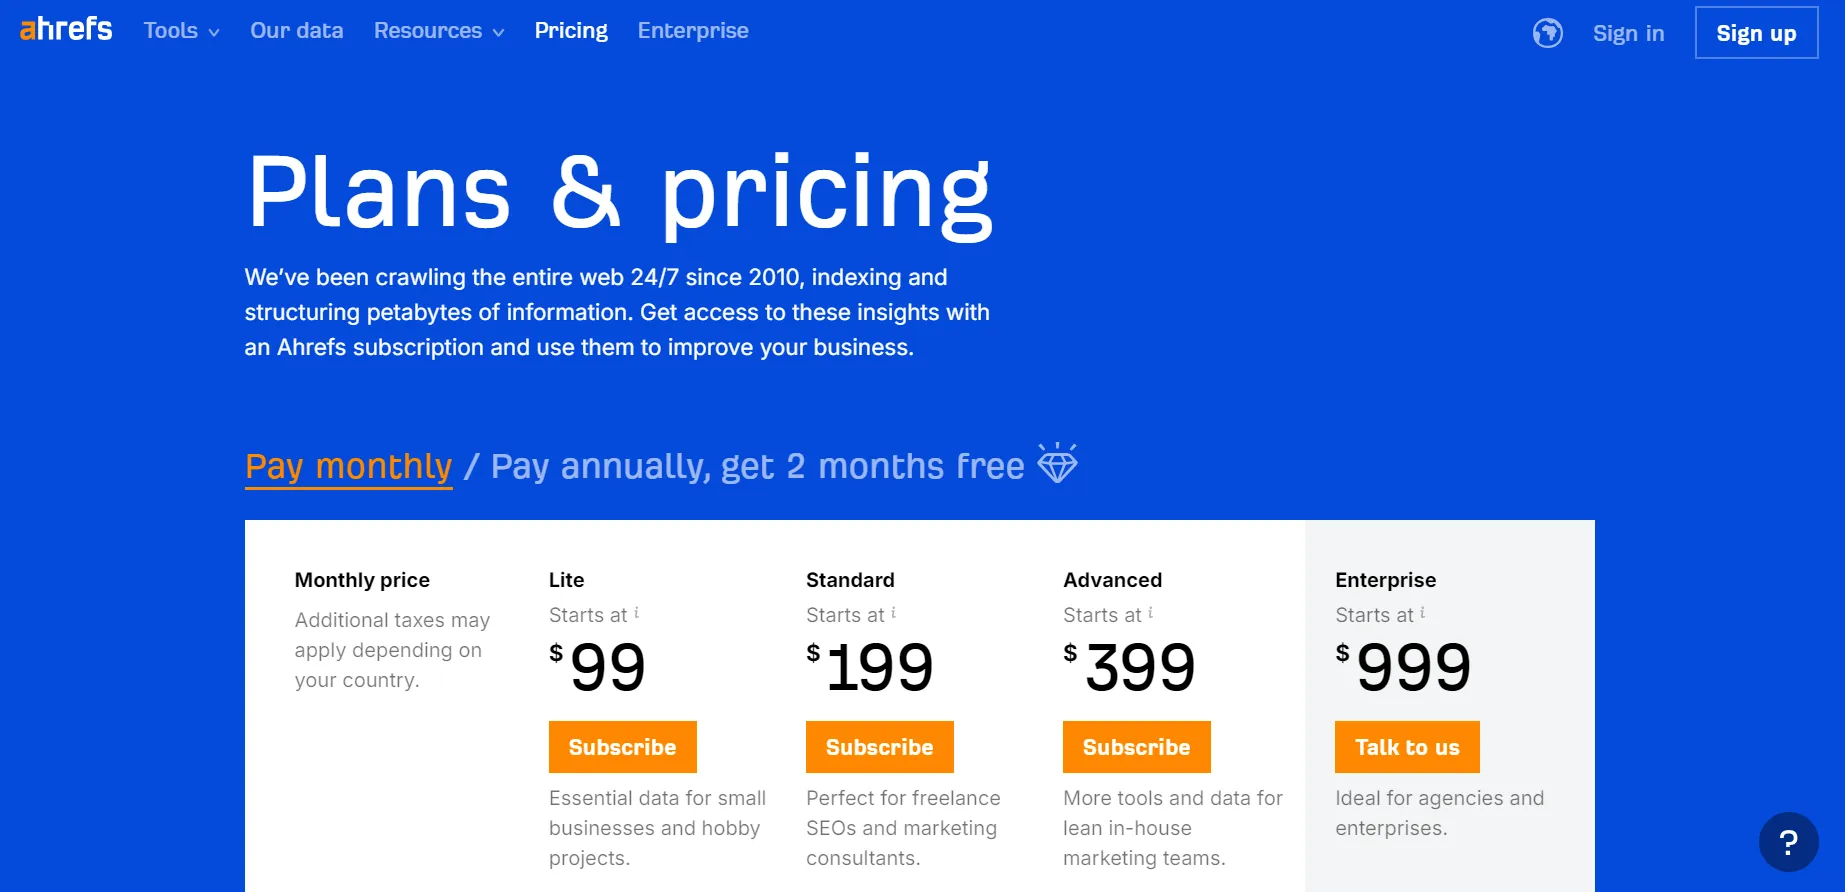 AHREFS PRICING